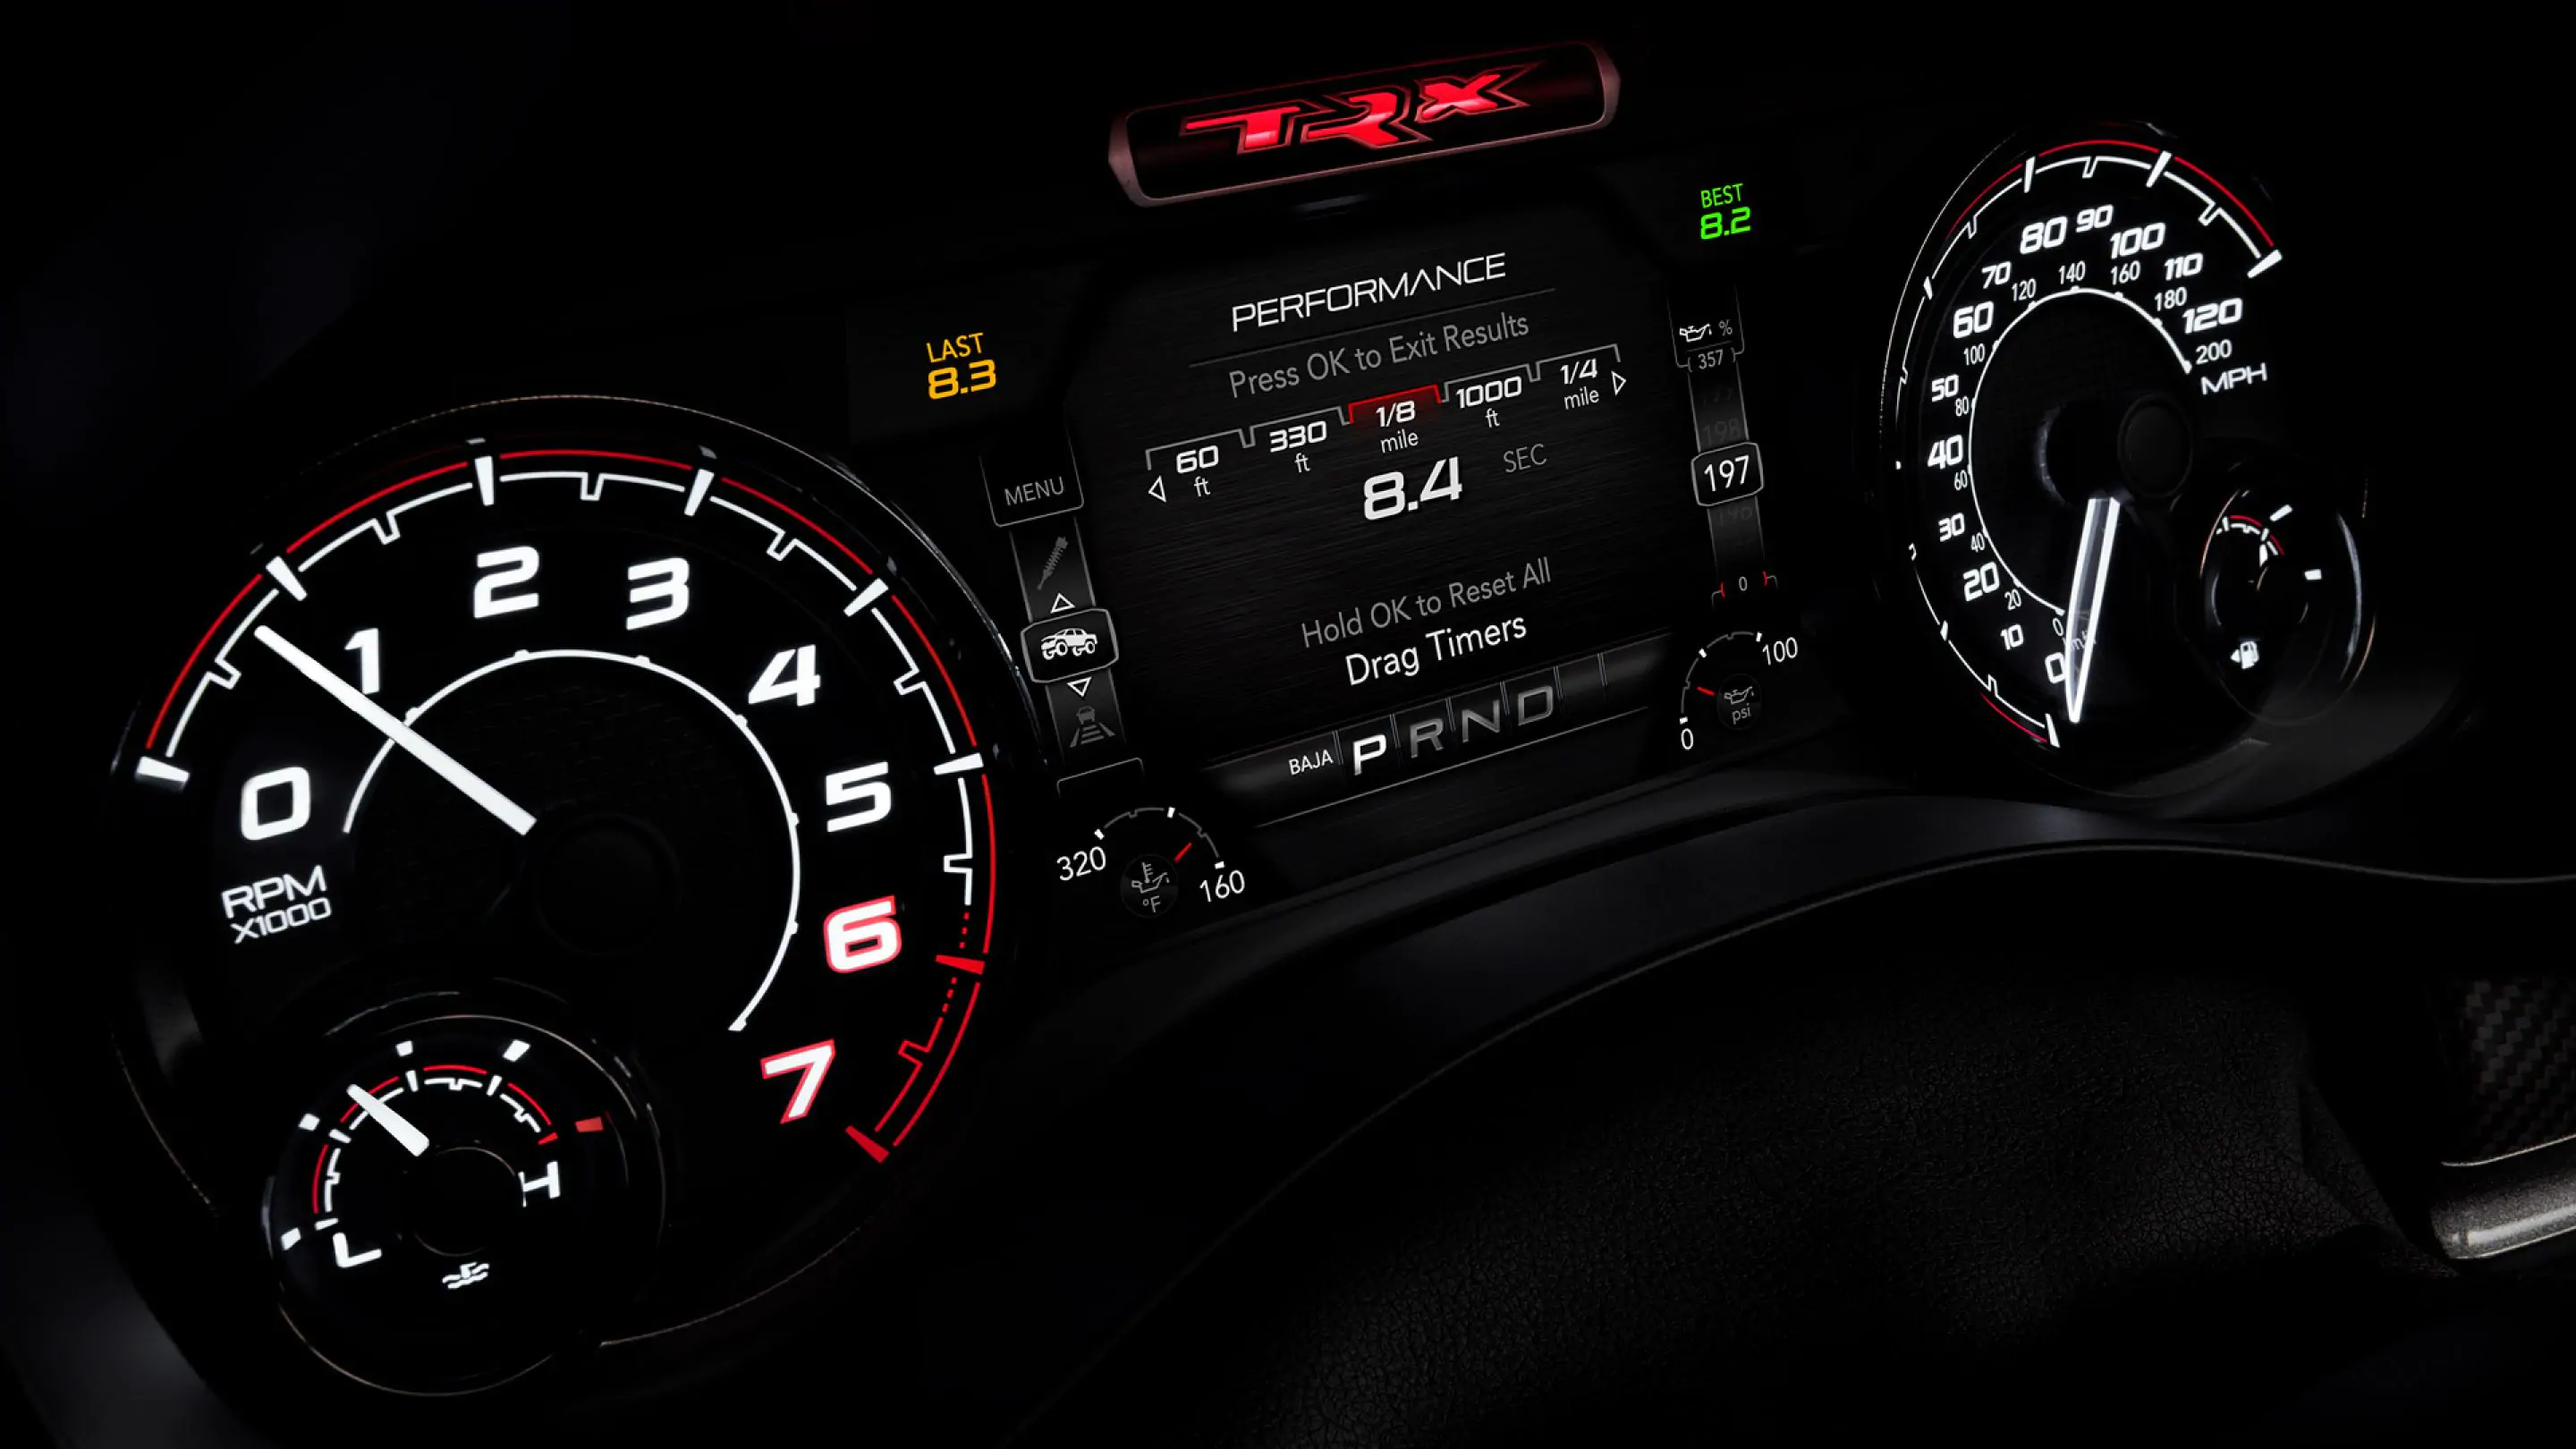 An LED-illuminated TRX badge sits prominently above the 7-inch Driver Information Digital Cluster Display. Below, new performance screens are displayed in bold colorways for enhanced driver feedback on both drive modes and Performance Pages.